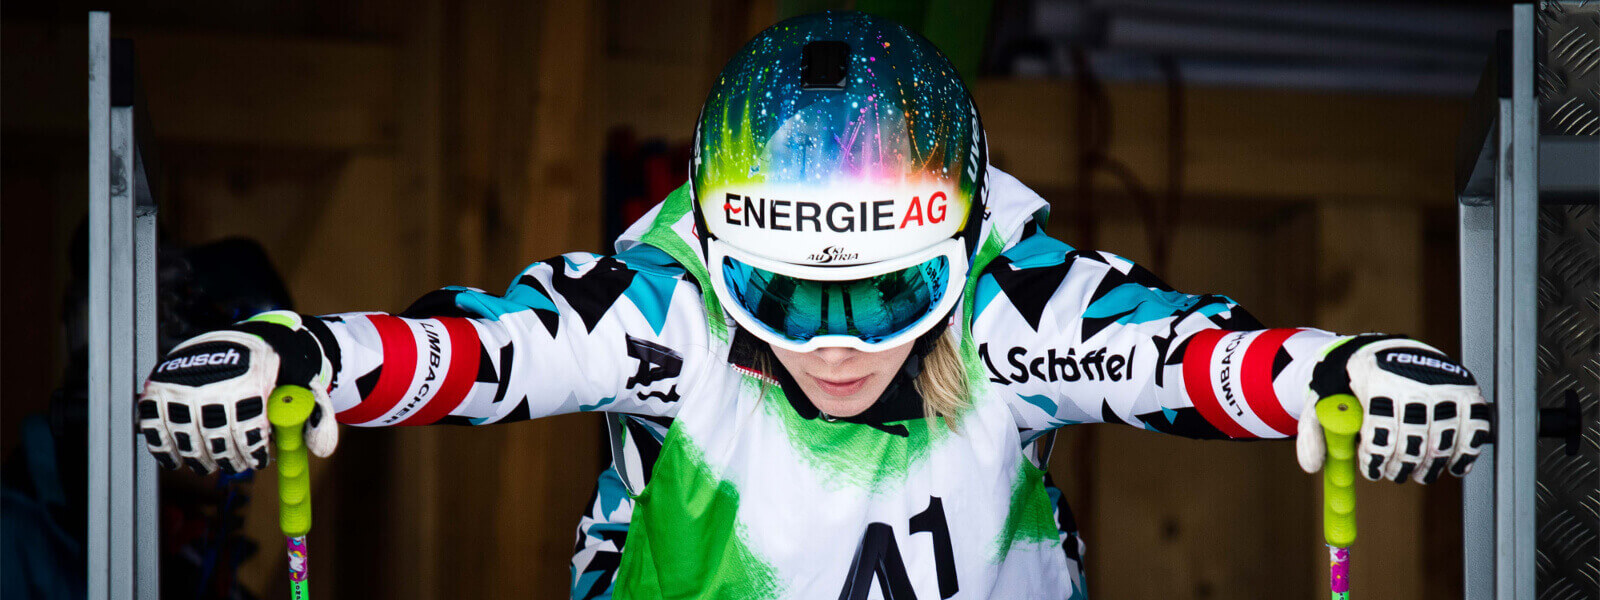 The Austrian ski racer Andrea Limbacher in the starting house at Ski Cross looks concentrated